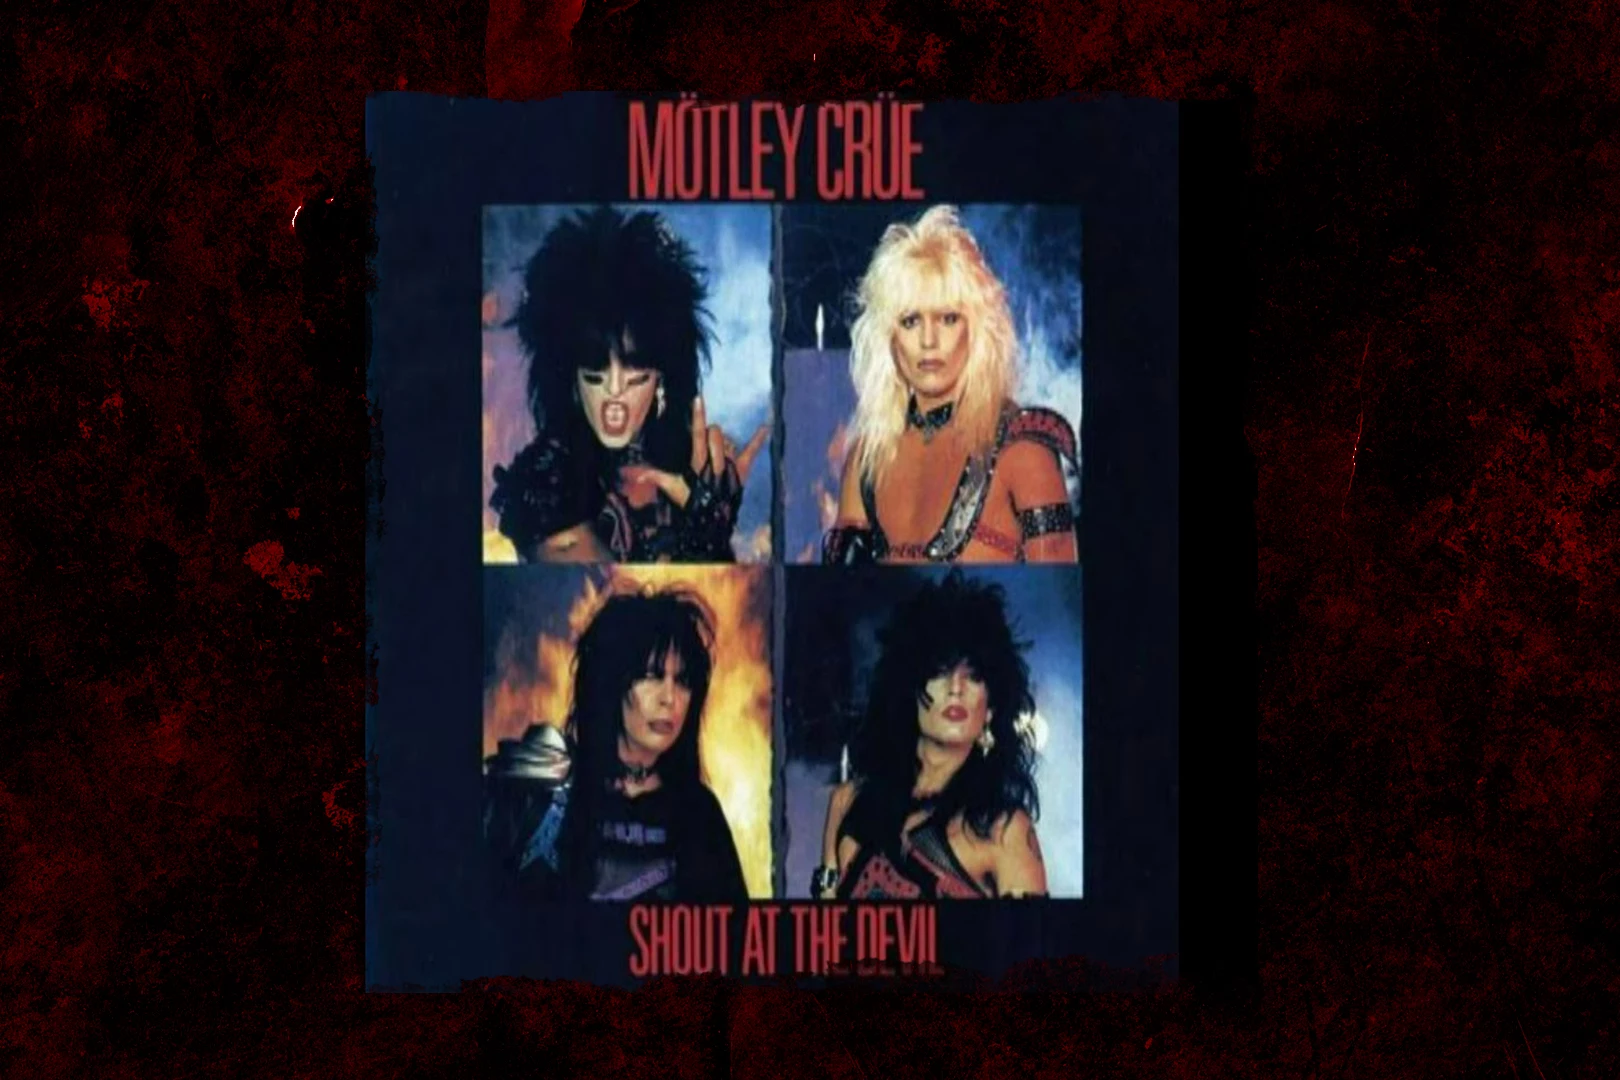 39 Years Ago: Motley Crue Release ‘Shout at the Devil’